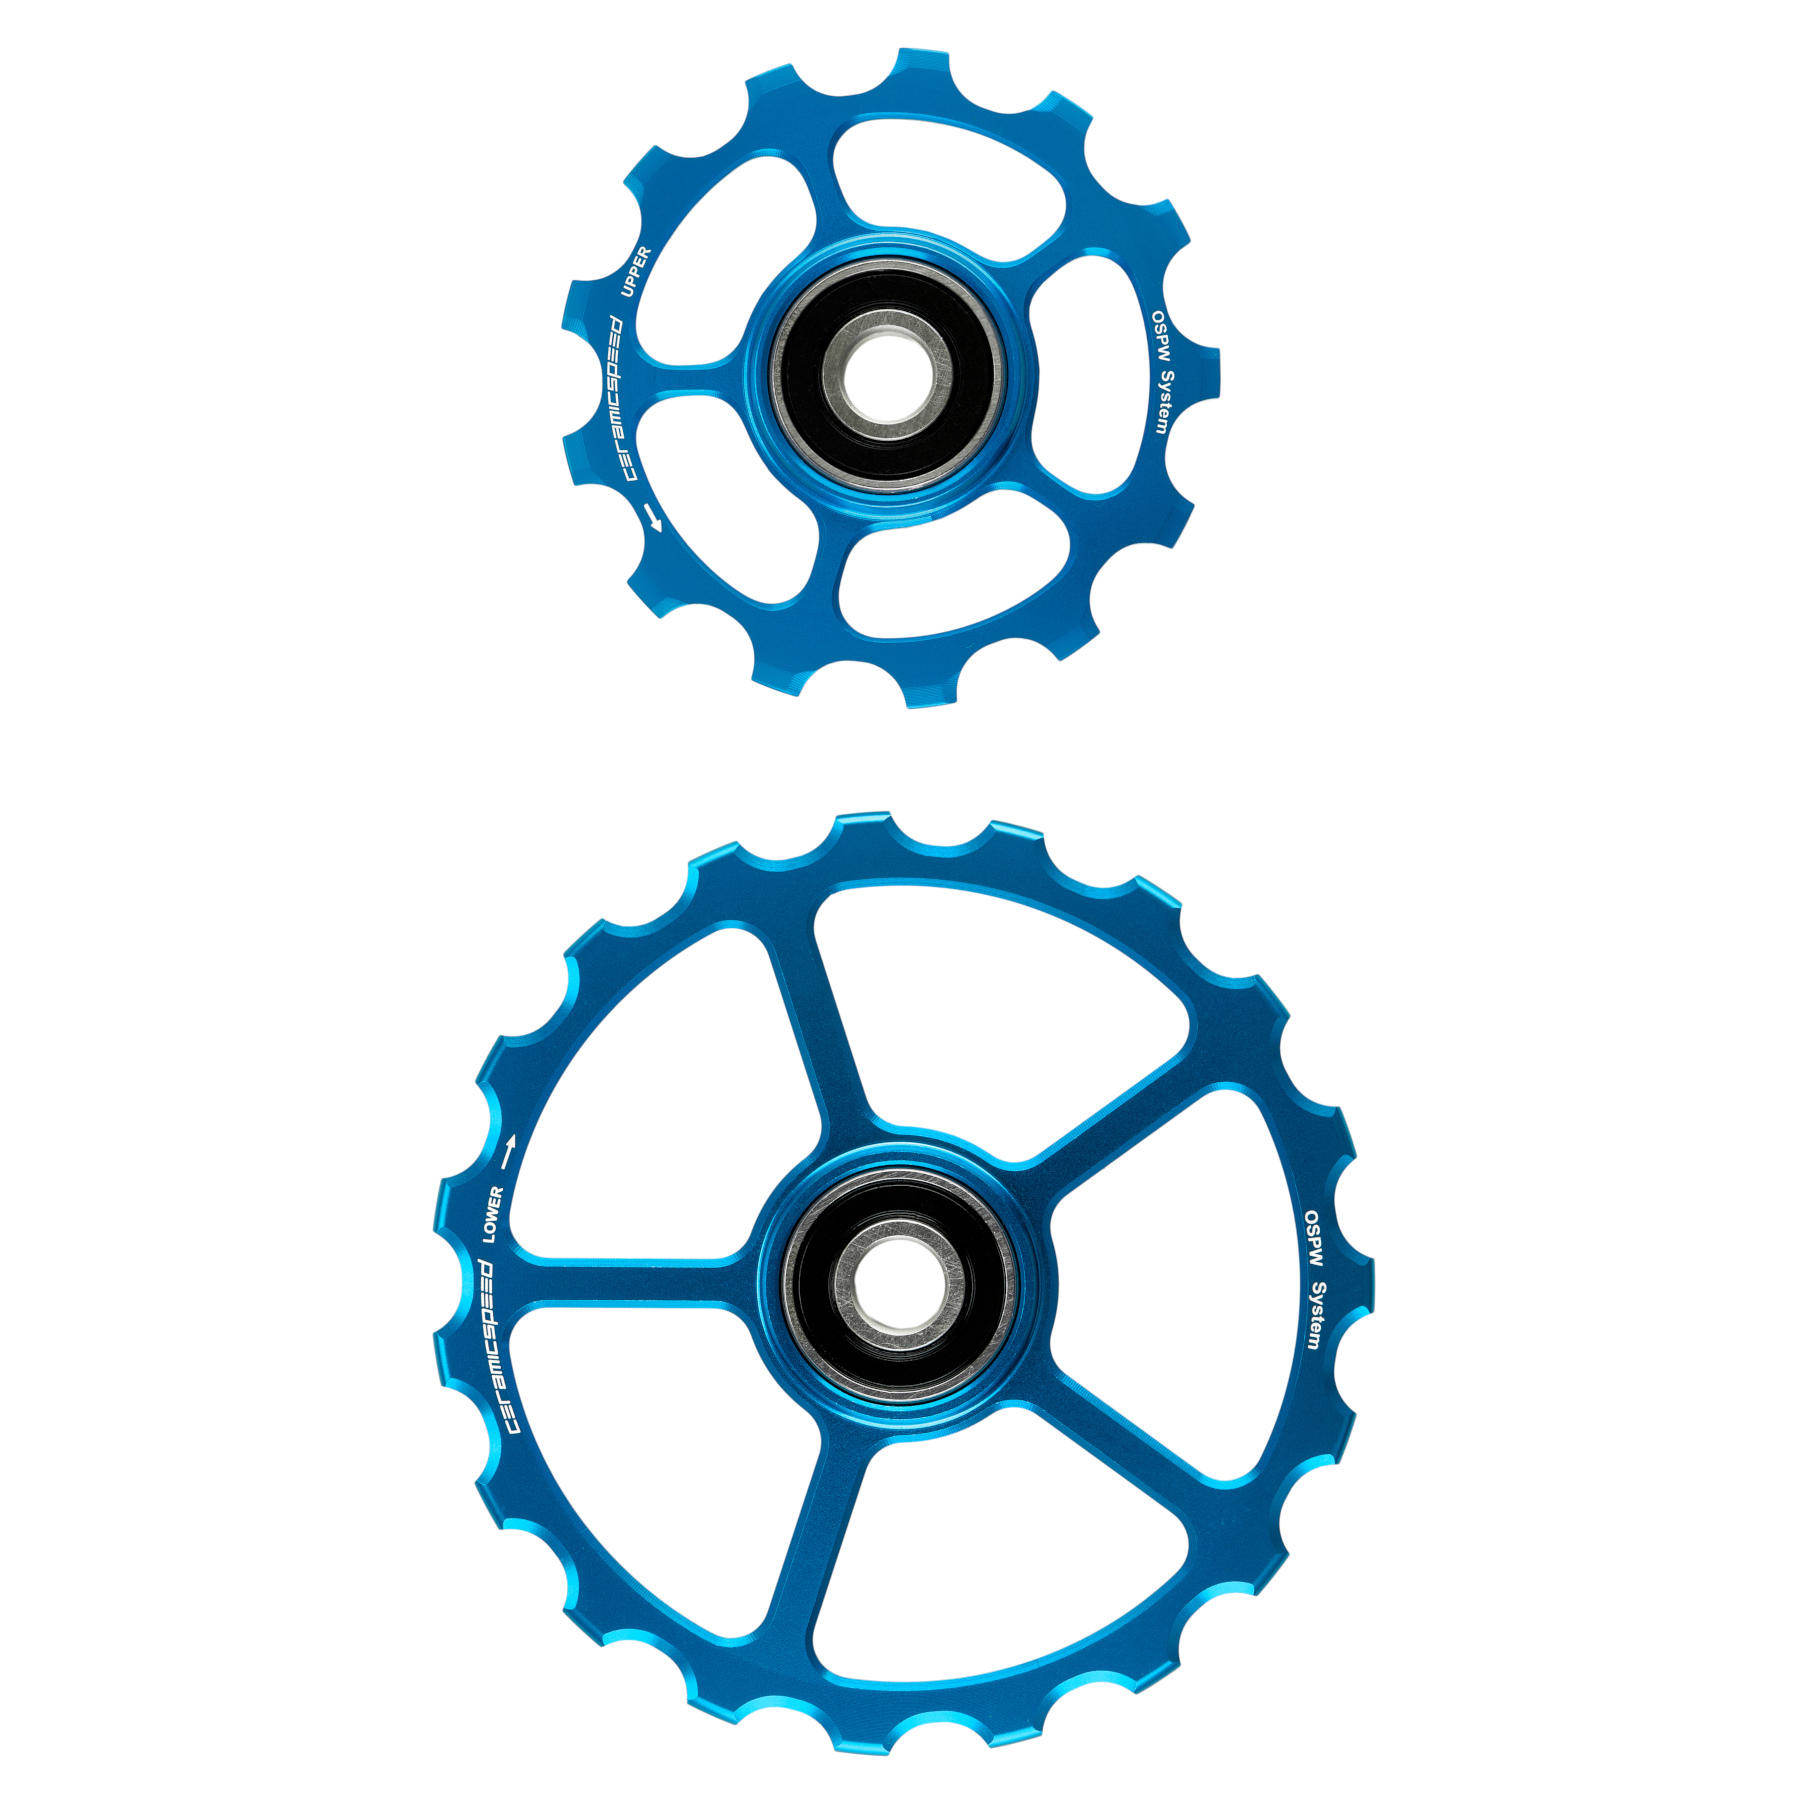 Picture of CeramicSpeed Replacement Derailleur Pulleys - OSPW | 13/19 Teeth | Coated Bearings - blue